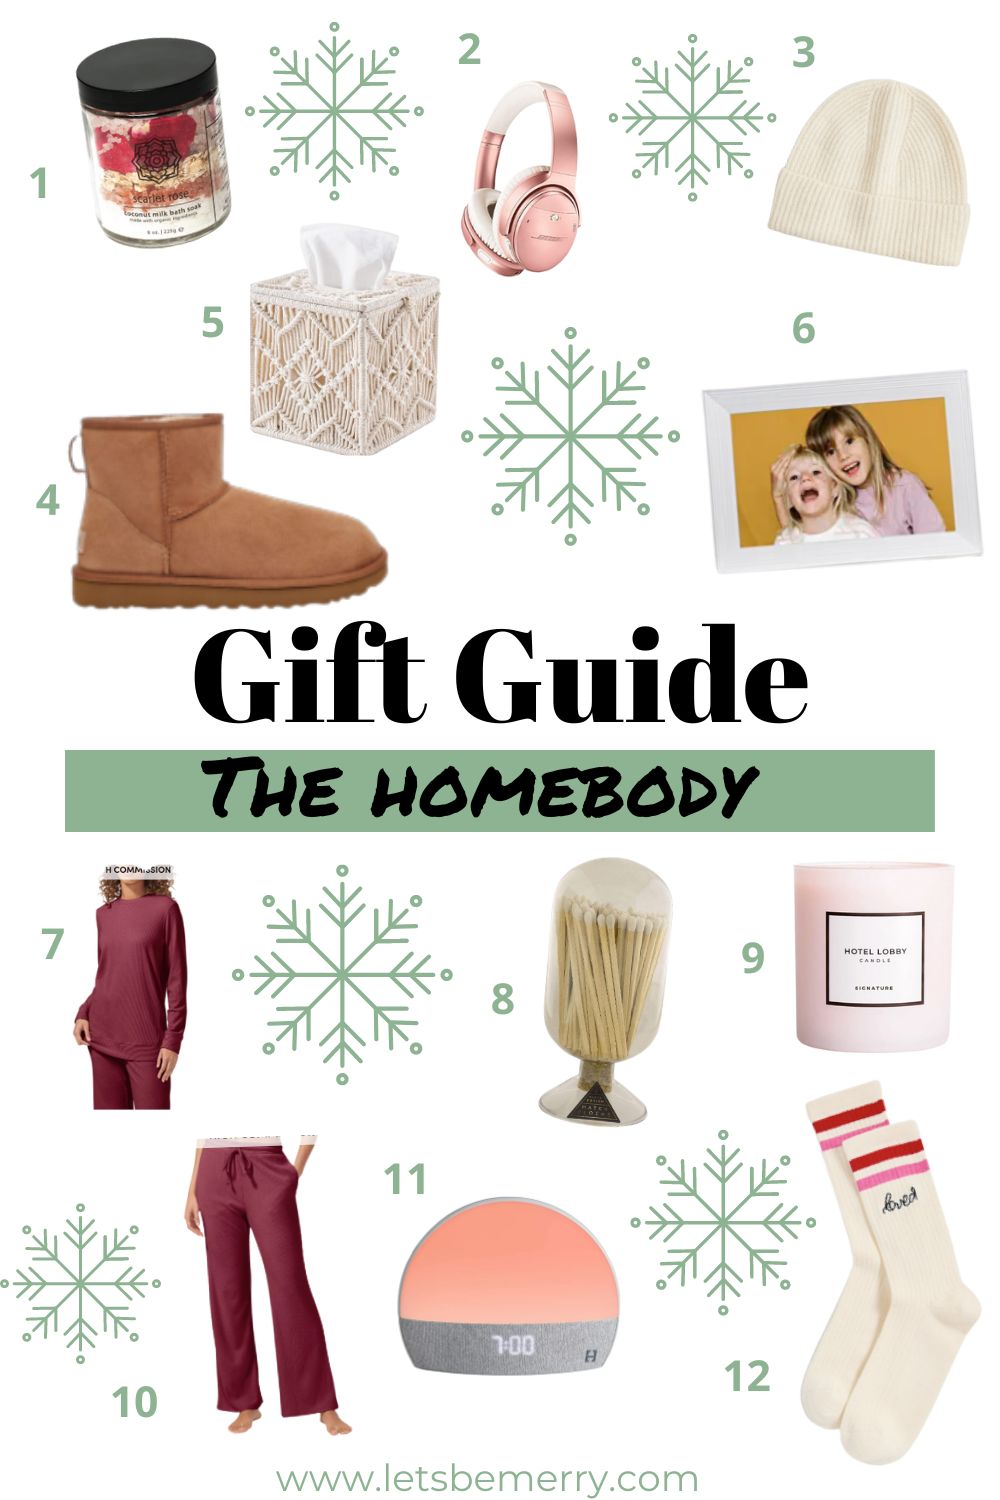 How to Create a Holiday Gift Guide: 7 Top Tips for 2022